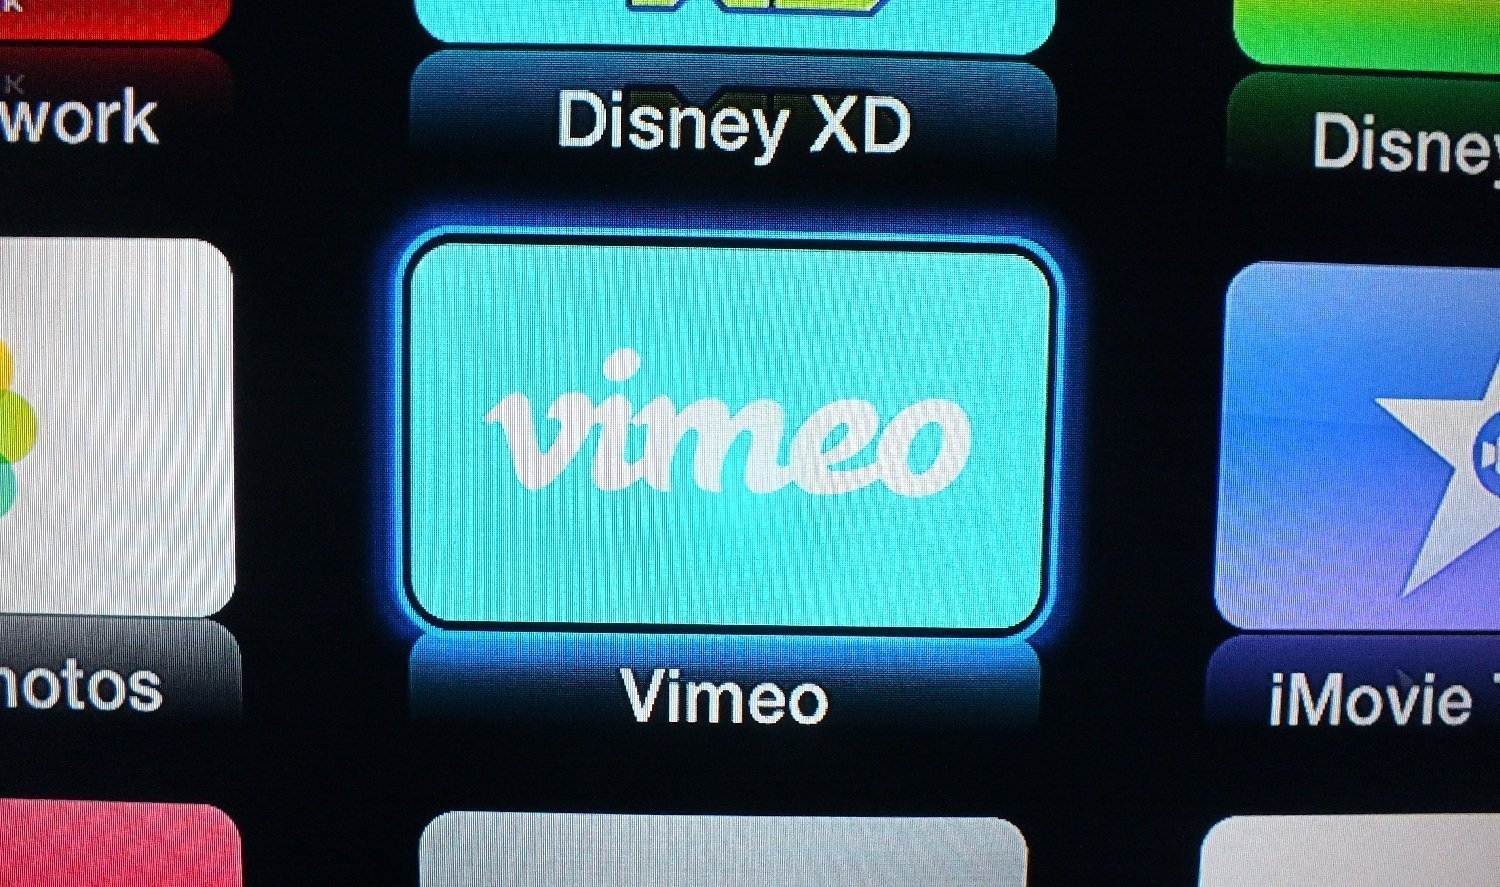 Vimeo channel for Apple TV just got a revamp